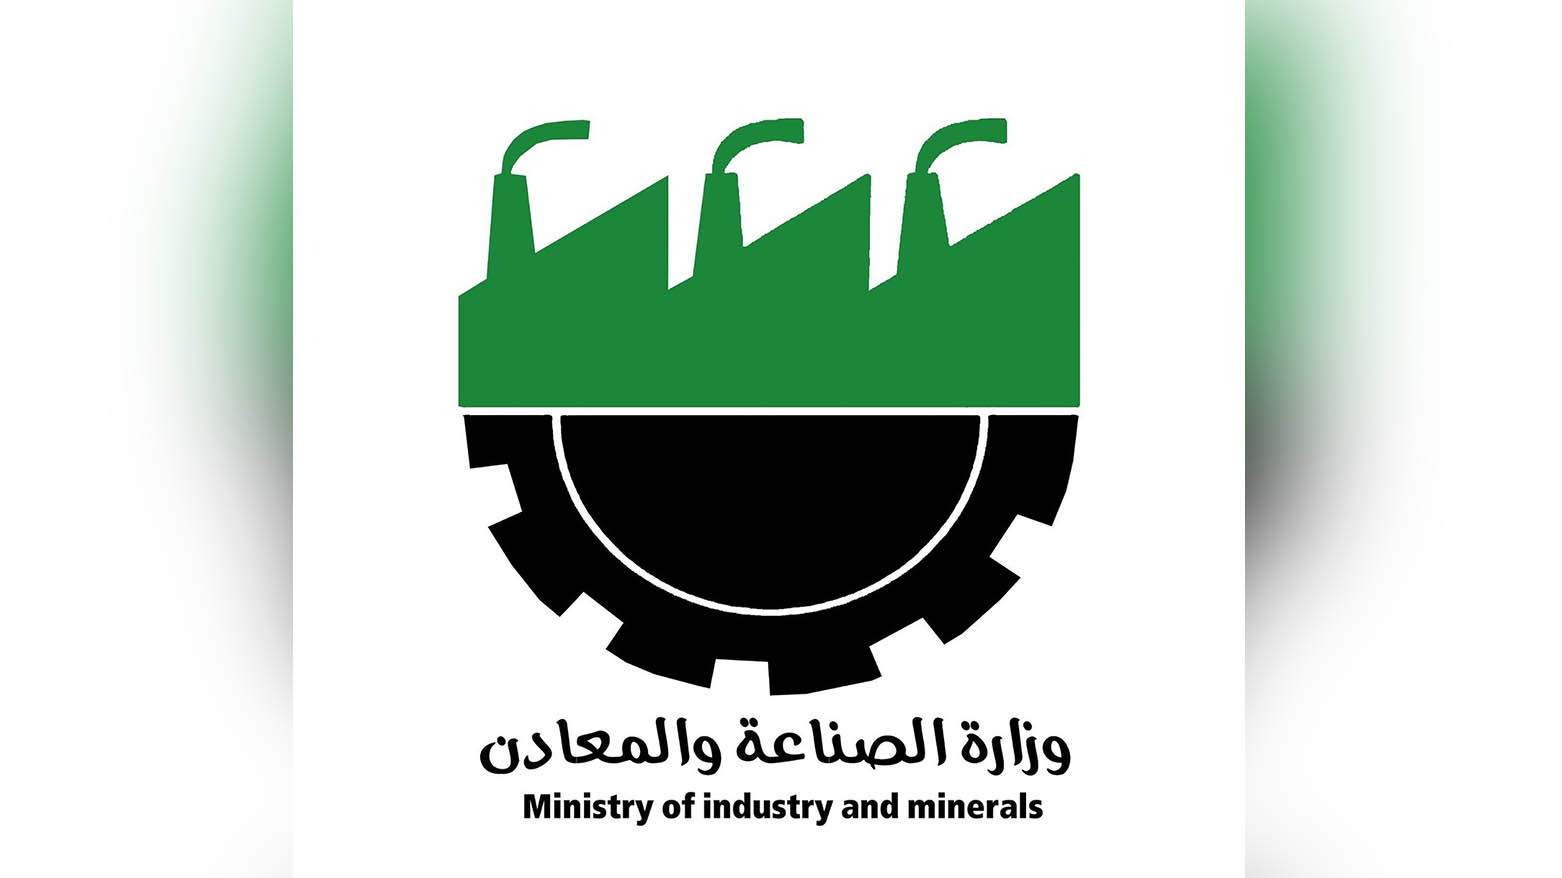 The logo of the Iraqi Ministry of Industry and Minerals. (Photo: Facebook)